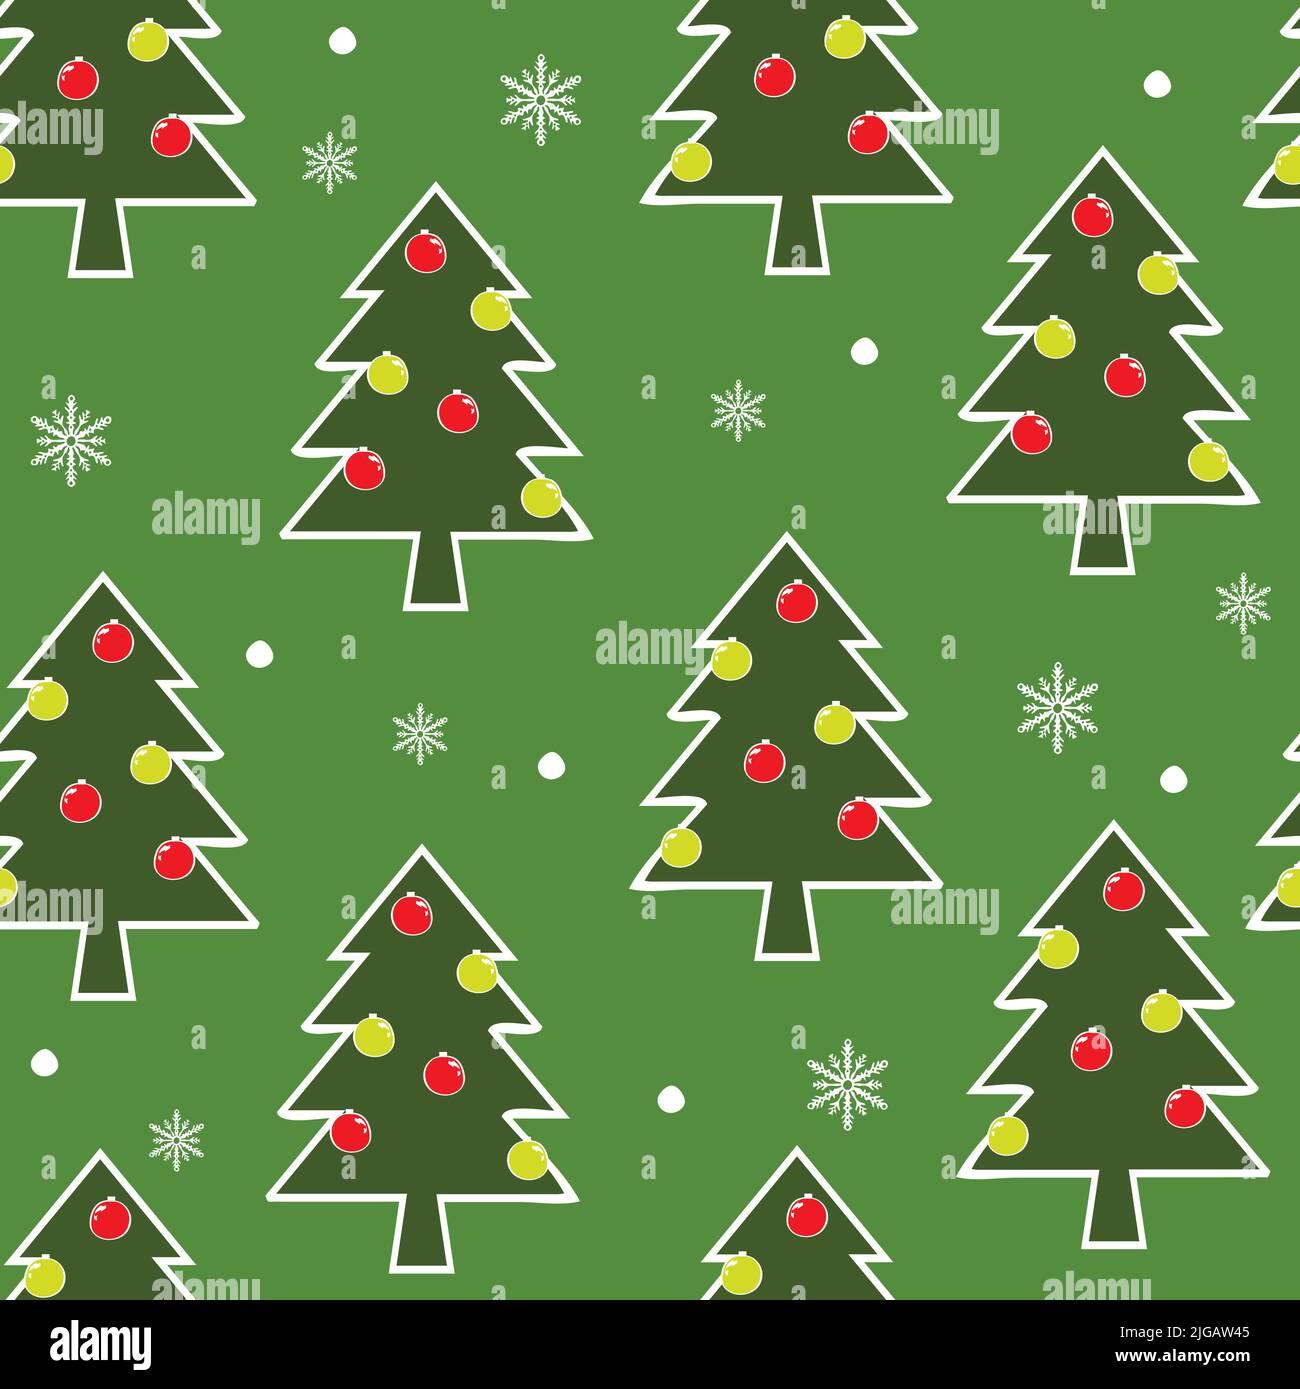 Seamless Vector Pattern With Christmas Trees On Green Background